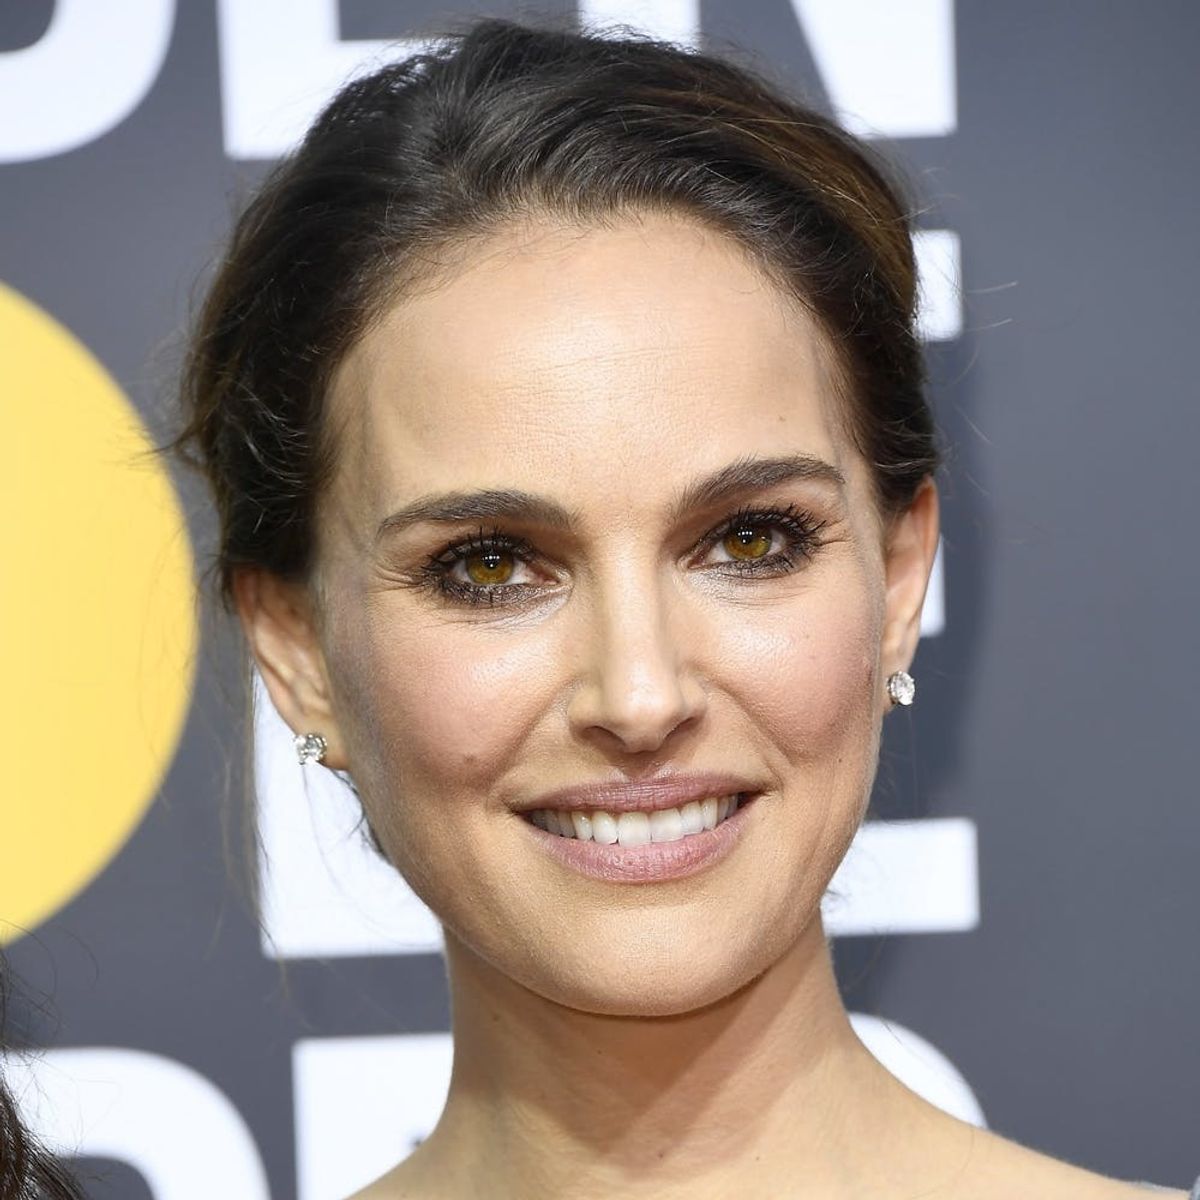 Natalie Portman’s Women’s March Story of Being Sexualized in Hollywood at Age 12 Will Break Your Heart